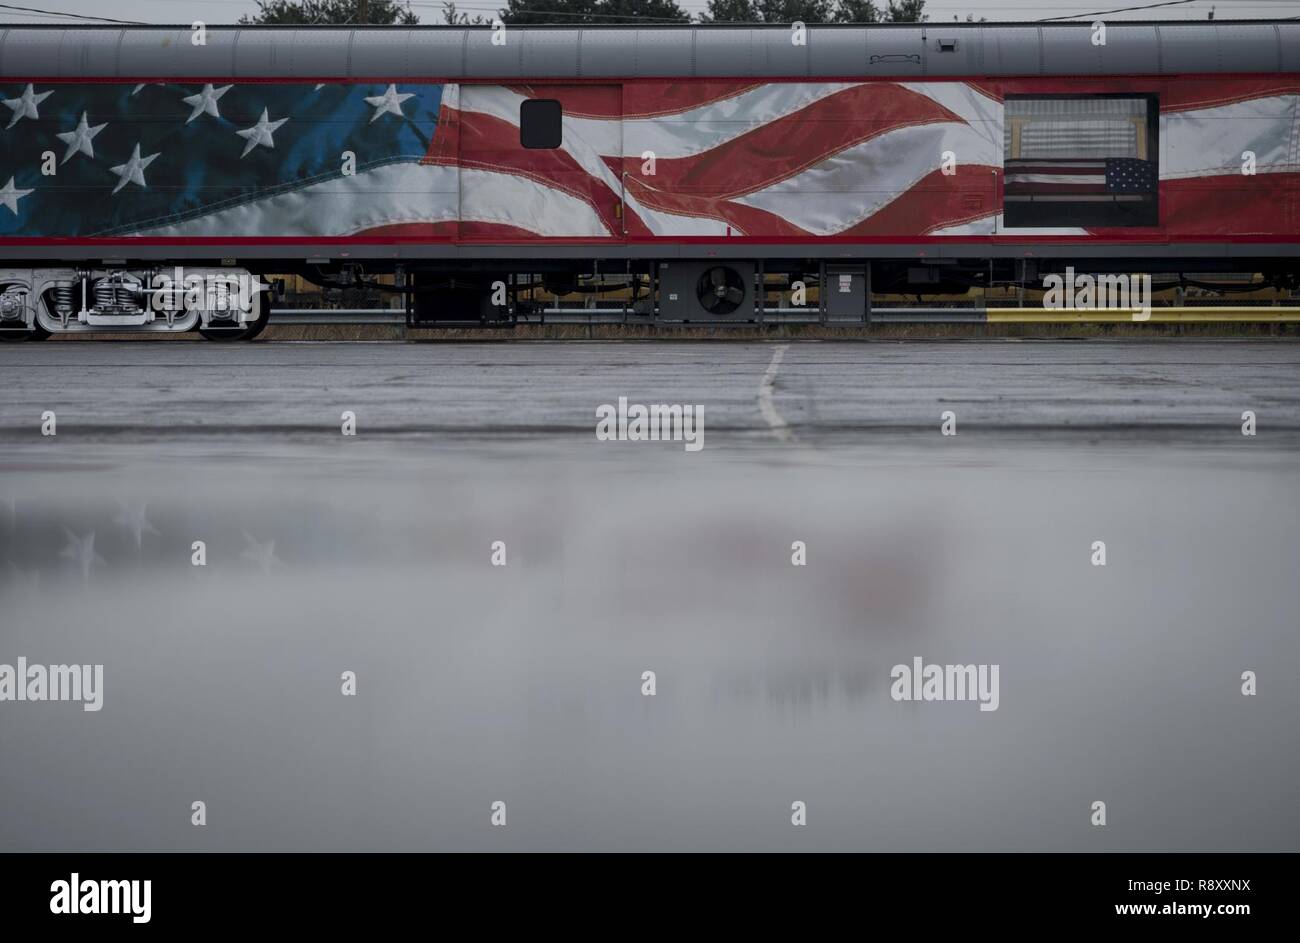 The funeral car, carrying the former President George H.W. Bush, heads to College Station, Texas after a departure ceremony at Union Pacific Westfield Auto Facility, Spring, Texas, Dec. 6, 2018. The funeral car was pulled by the 4141 locomotive. Nearly 4,000 military and civilian personnel from across all branches of the U.S. armed forces, including Reserve and National Guard components, provided ceremonial support during the state funeral of George H.W. Bush, the 41st President of the United States. Stock Photo